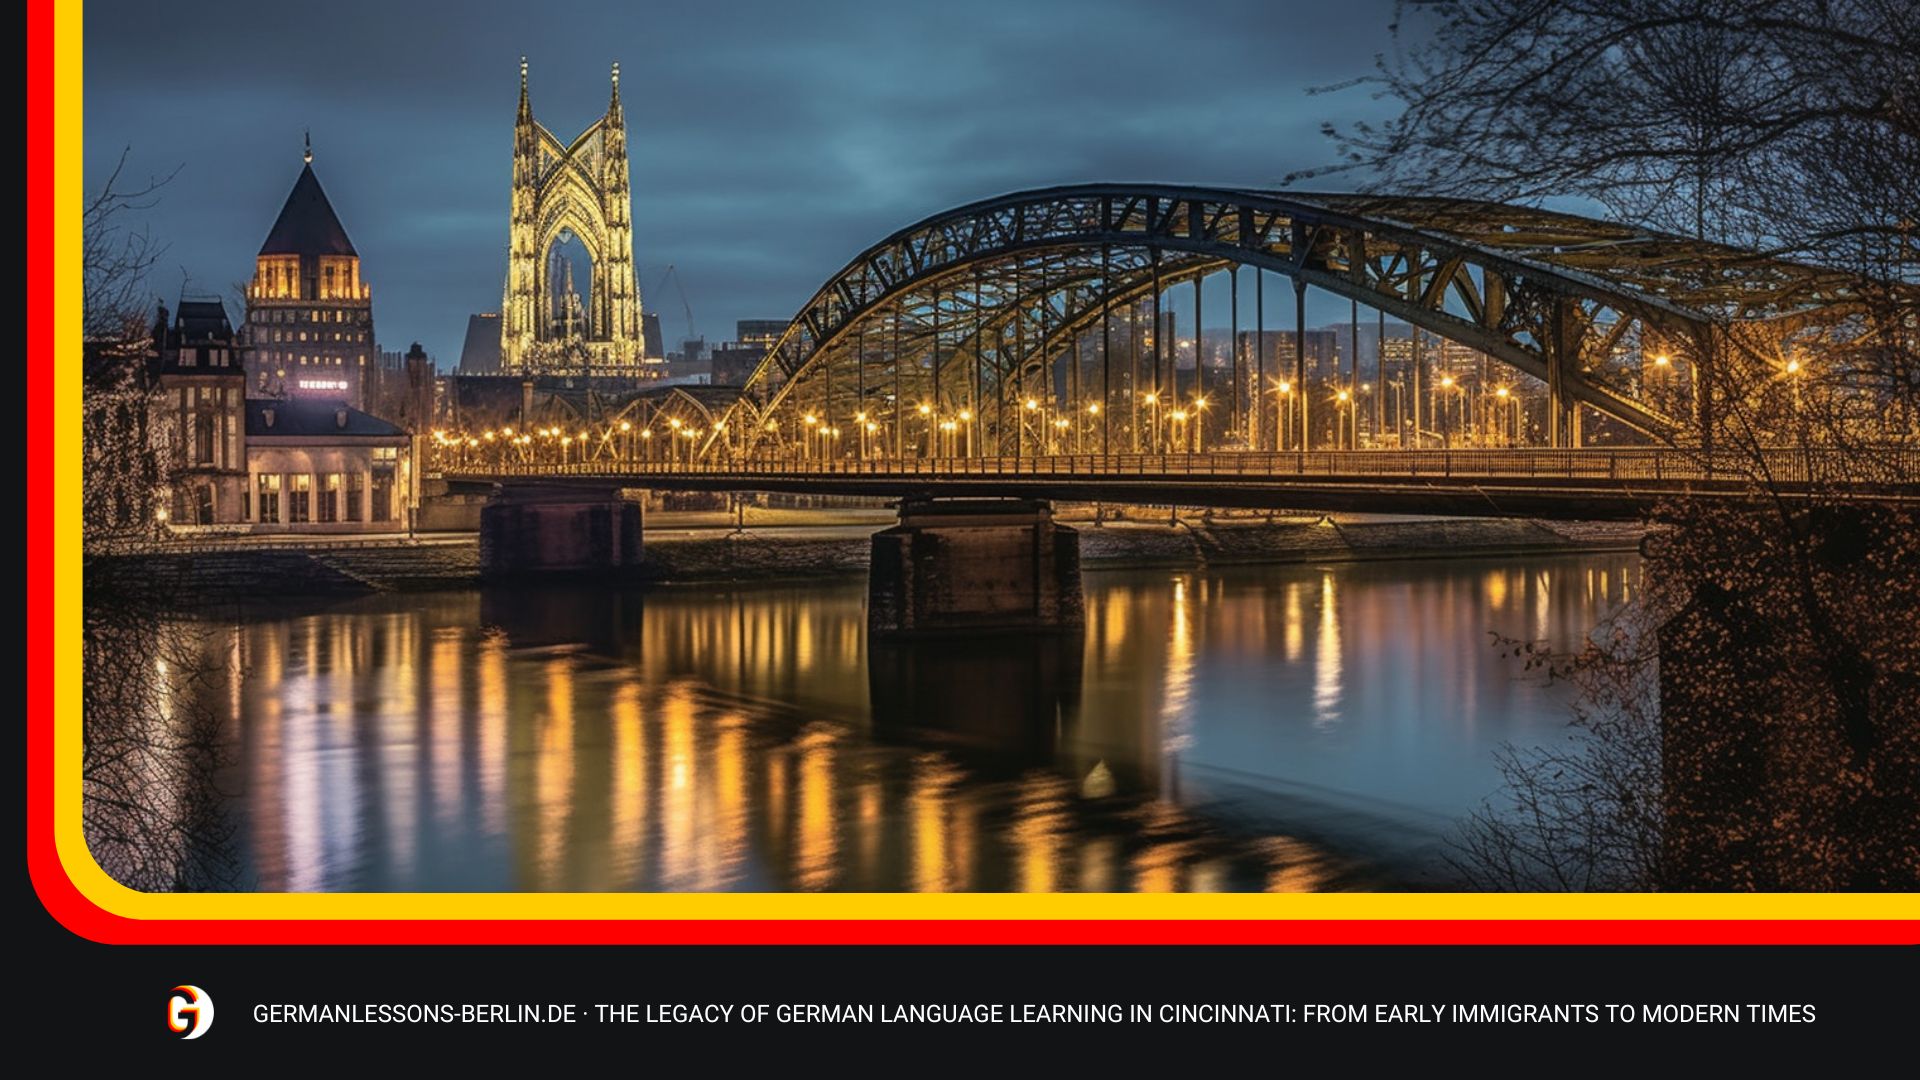 The Legacy Of German Language Learning In Cincinnati: From Early Immigrants To Modern Times